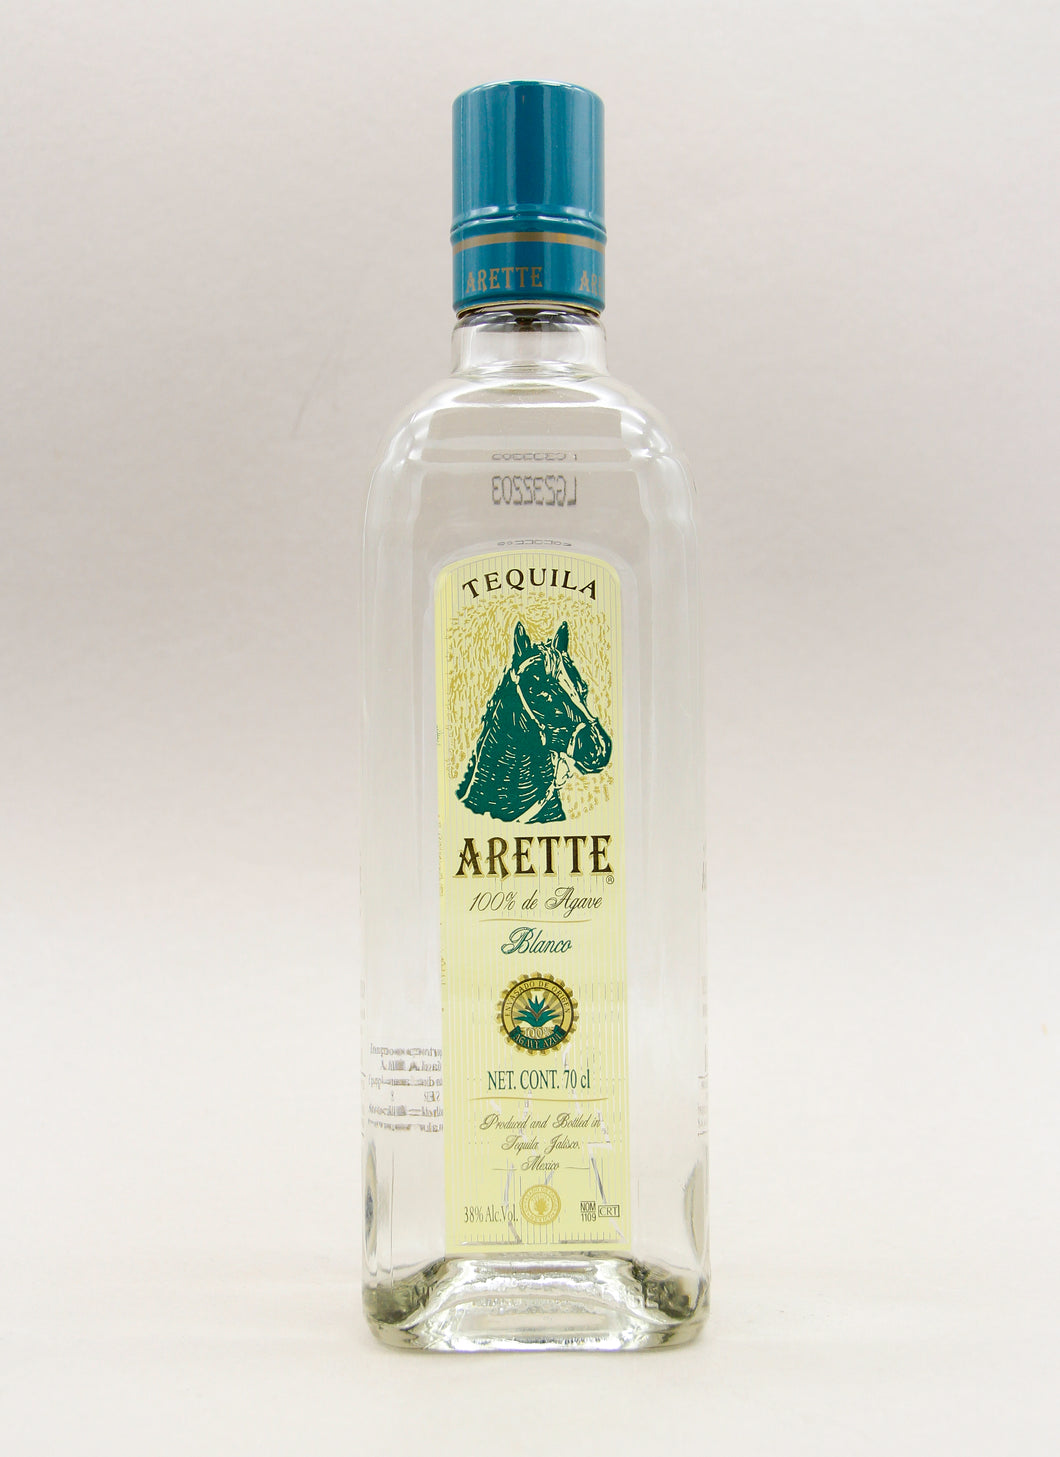 Arette Blanco Tequila 100% Agave (38%, 70cl)